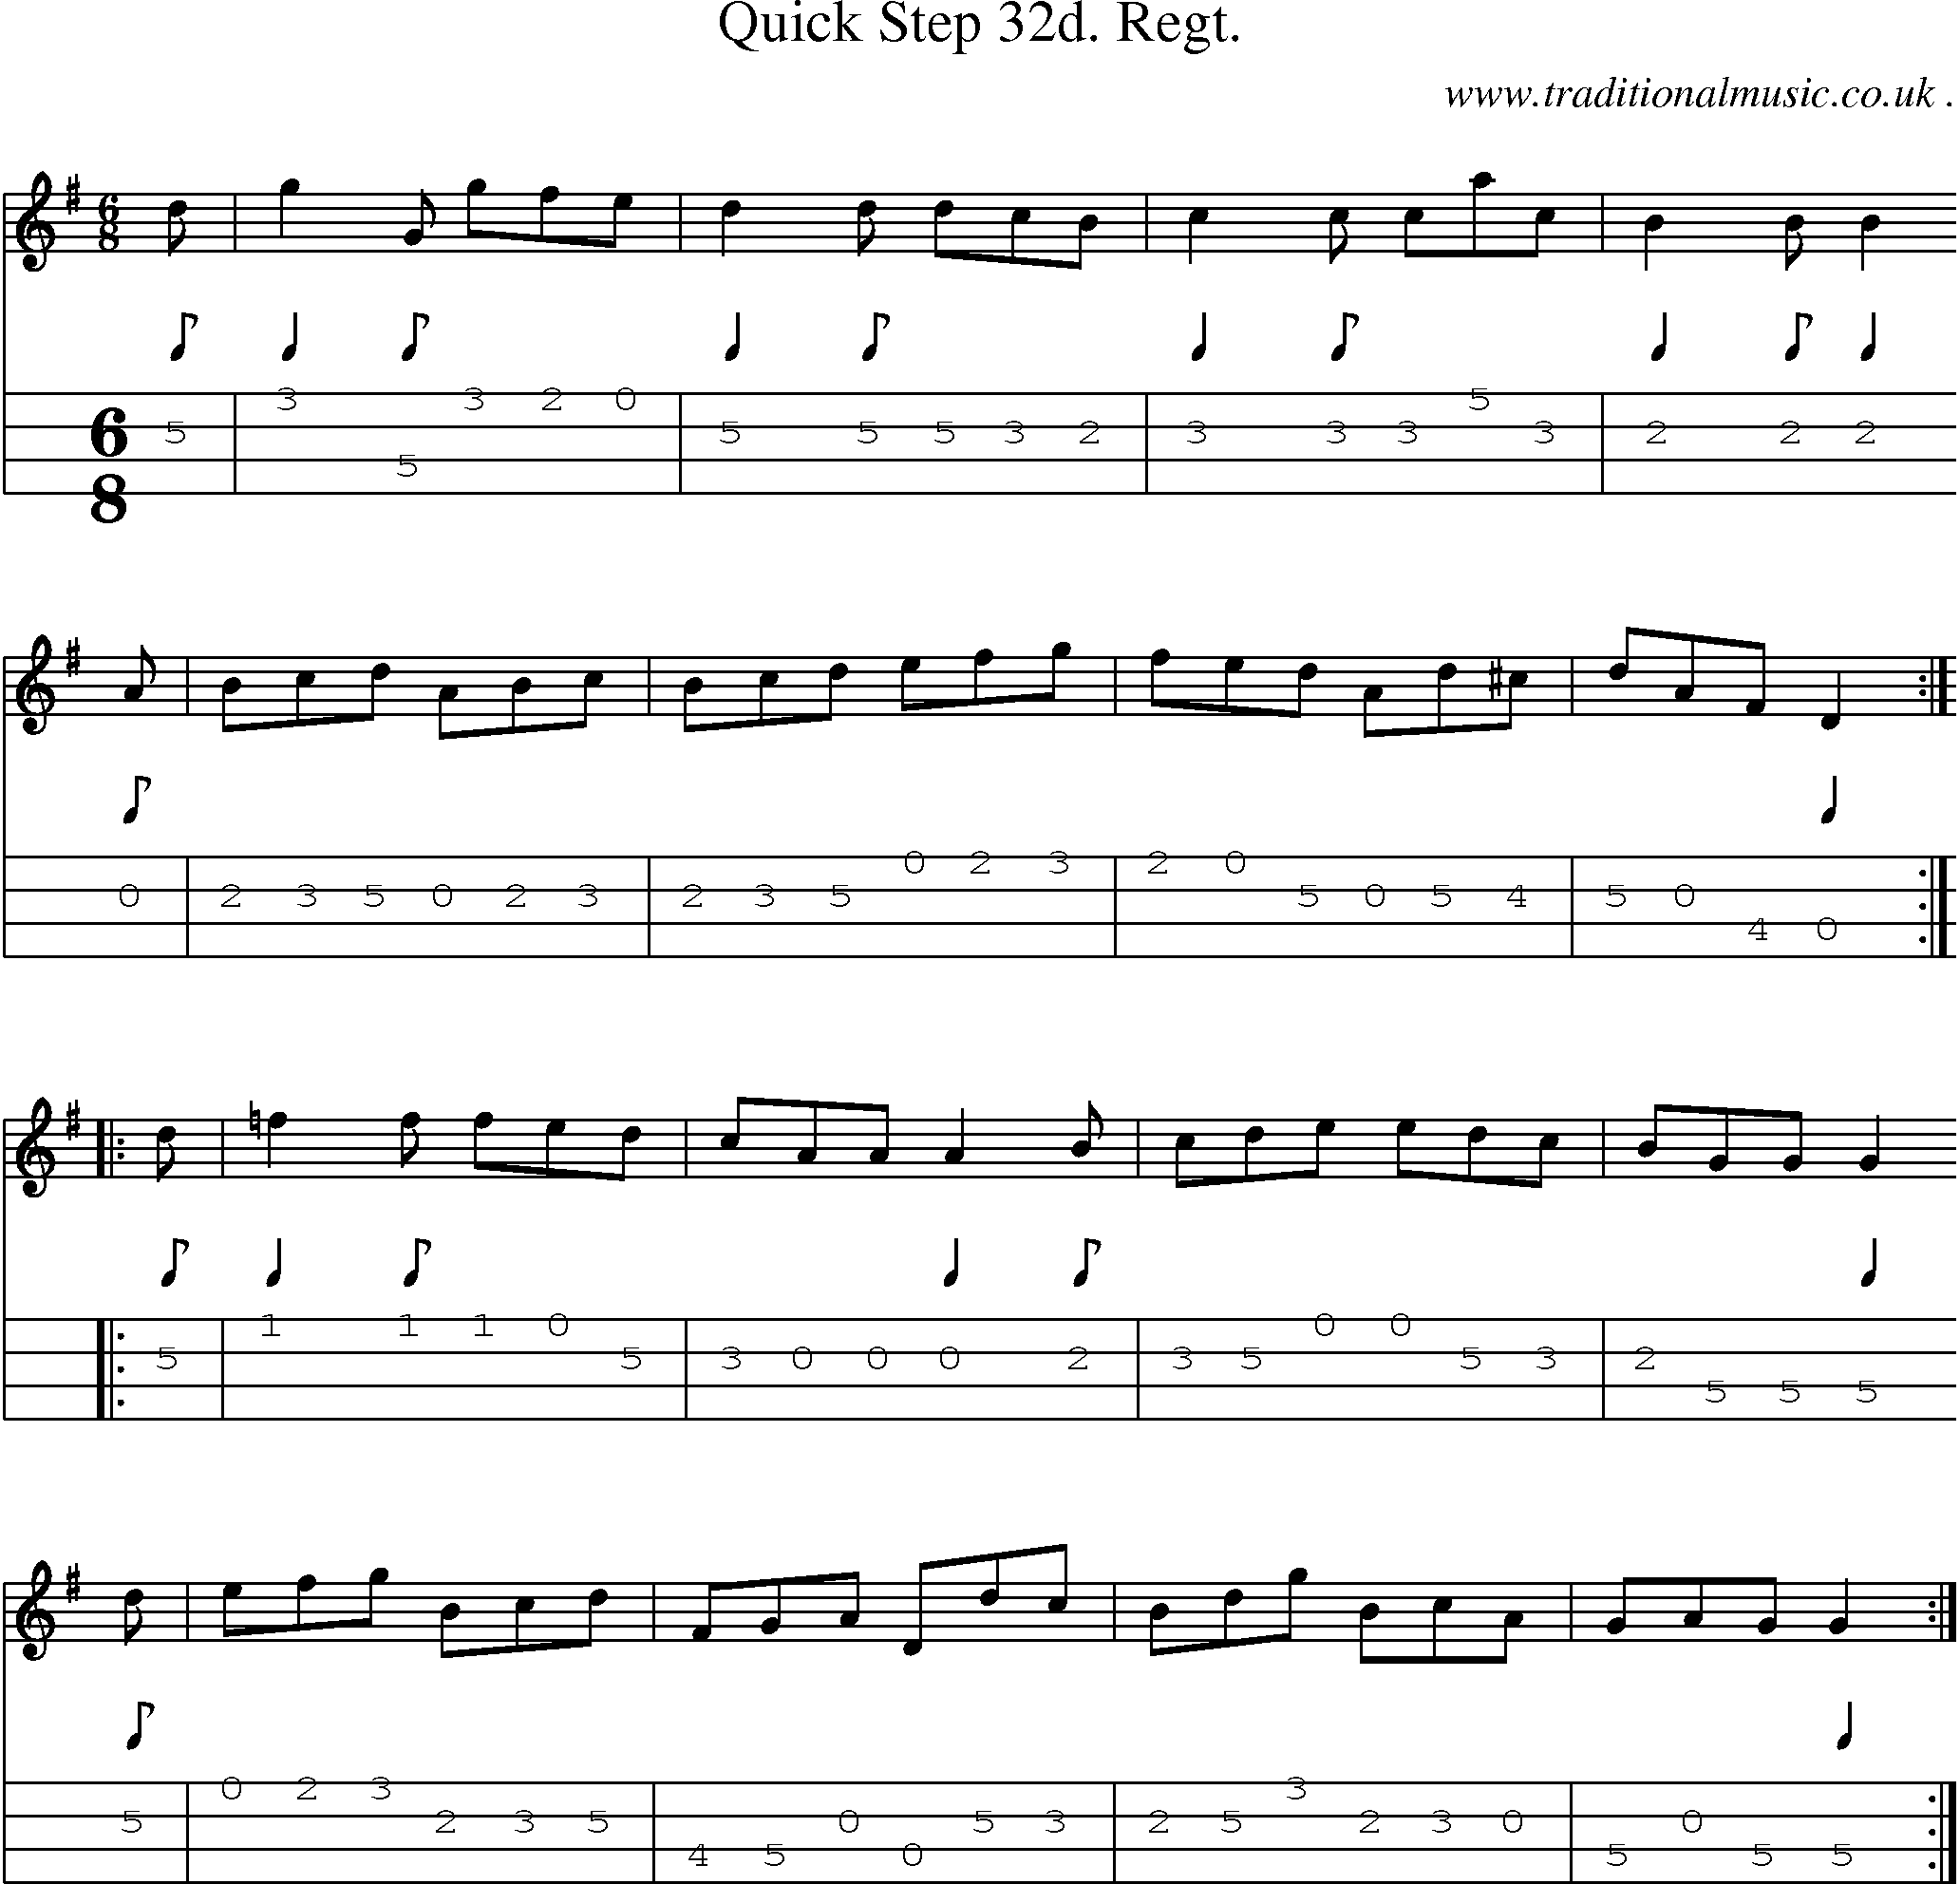 Sheet-Music and Mandolin Tabs for Quick Step 32d Regt